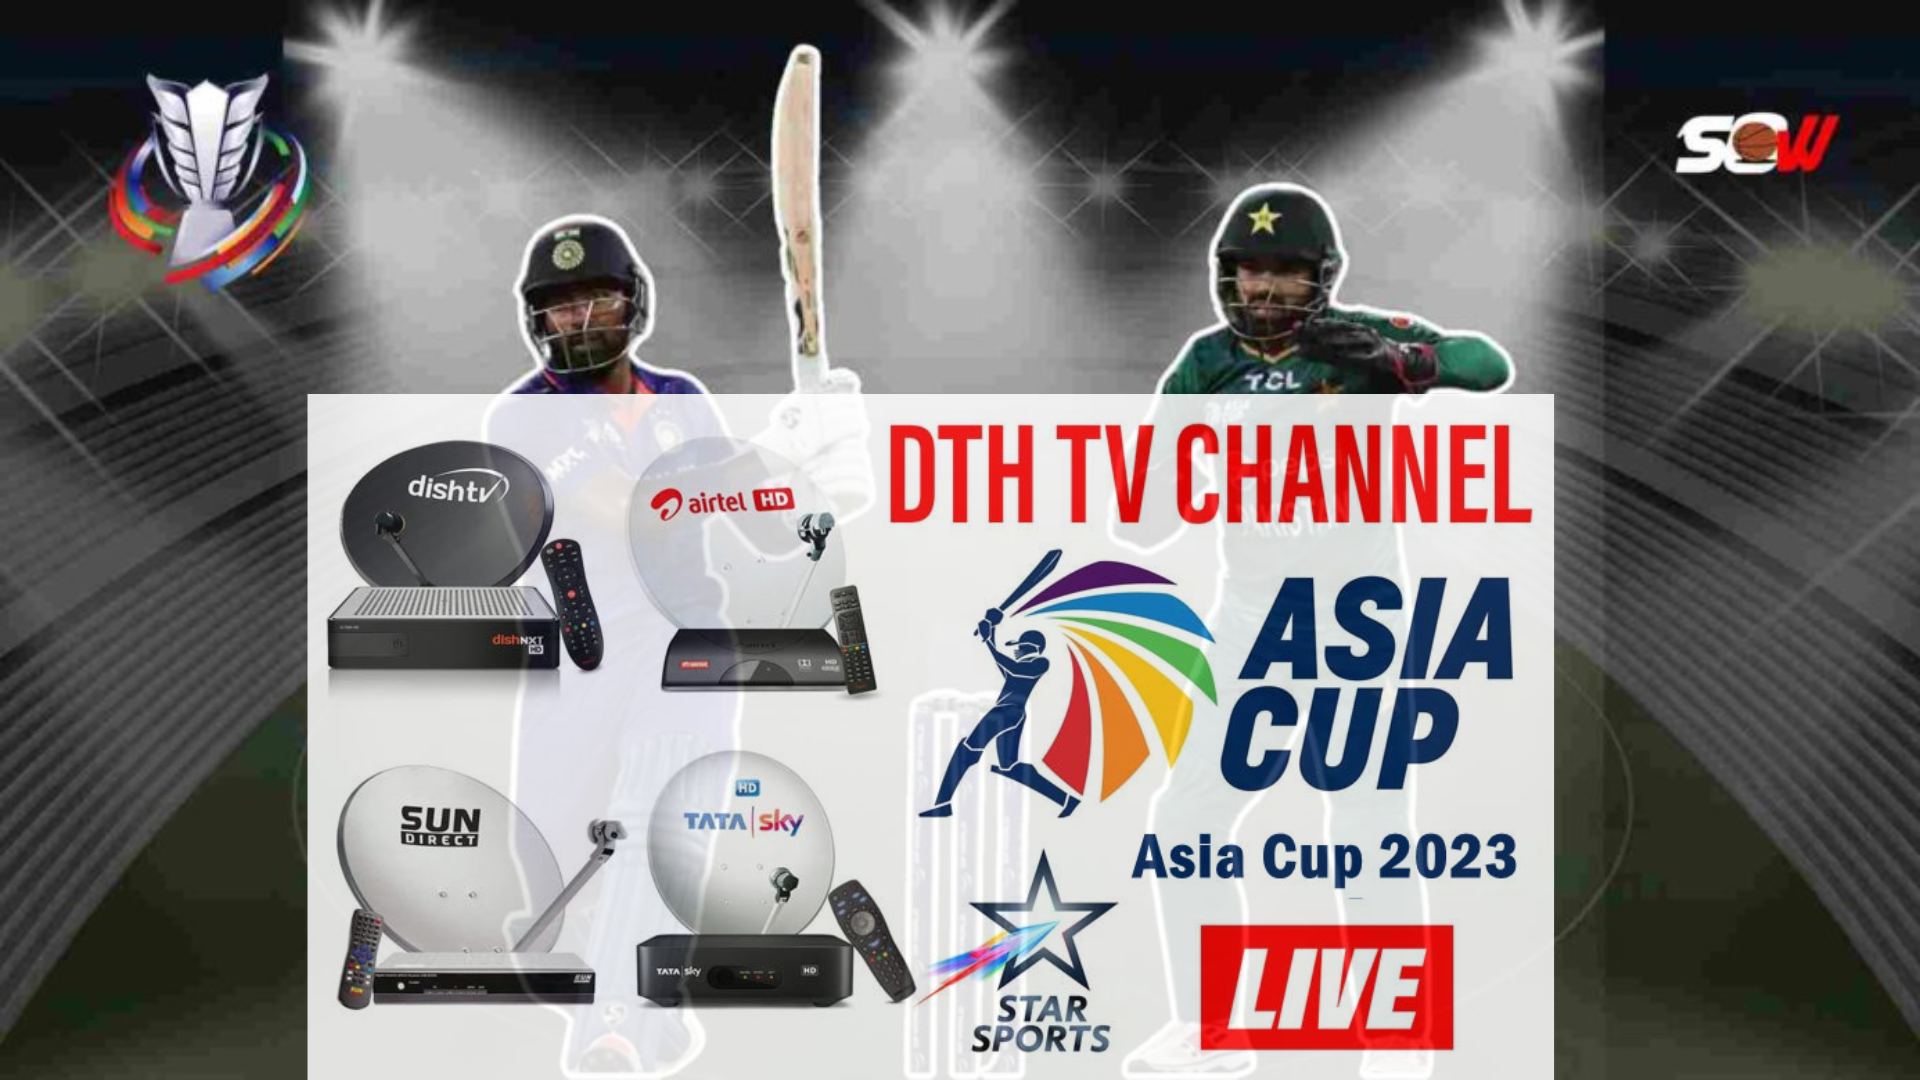 ASIA CUP 2023 BROADCAST CHANNELS and LIVE STREAMING